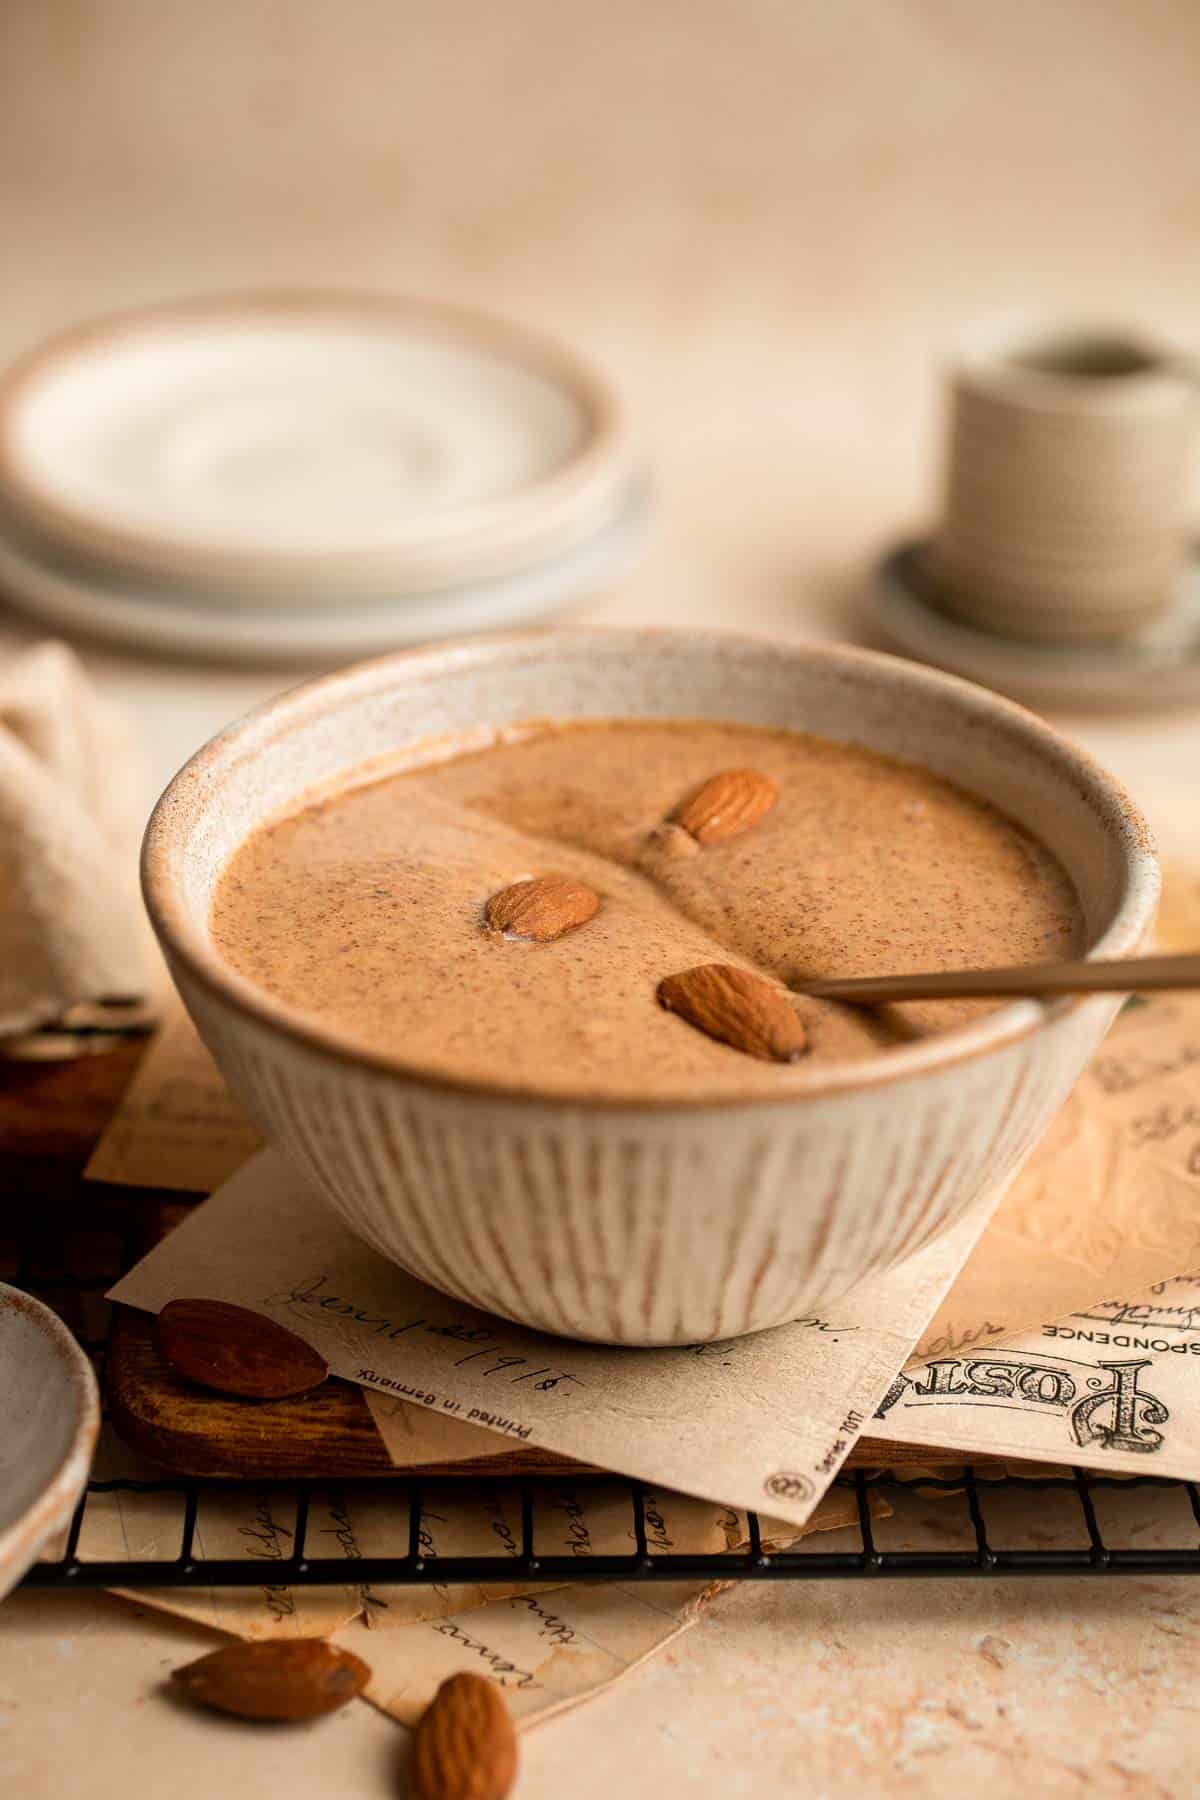 Skip the store-bought stuff and make this delicious Homemade Almond Butter with just one simple ingredient. It's so much easier than you'd expect! | aheadofthyme.com